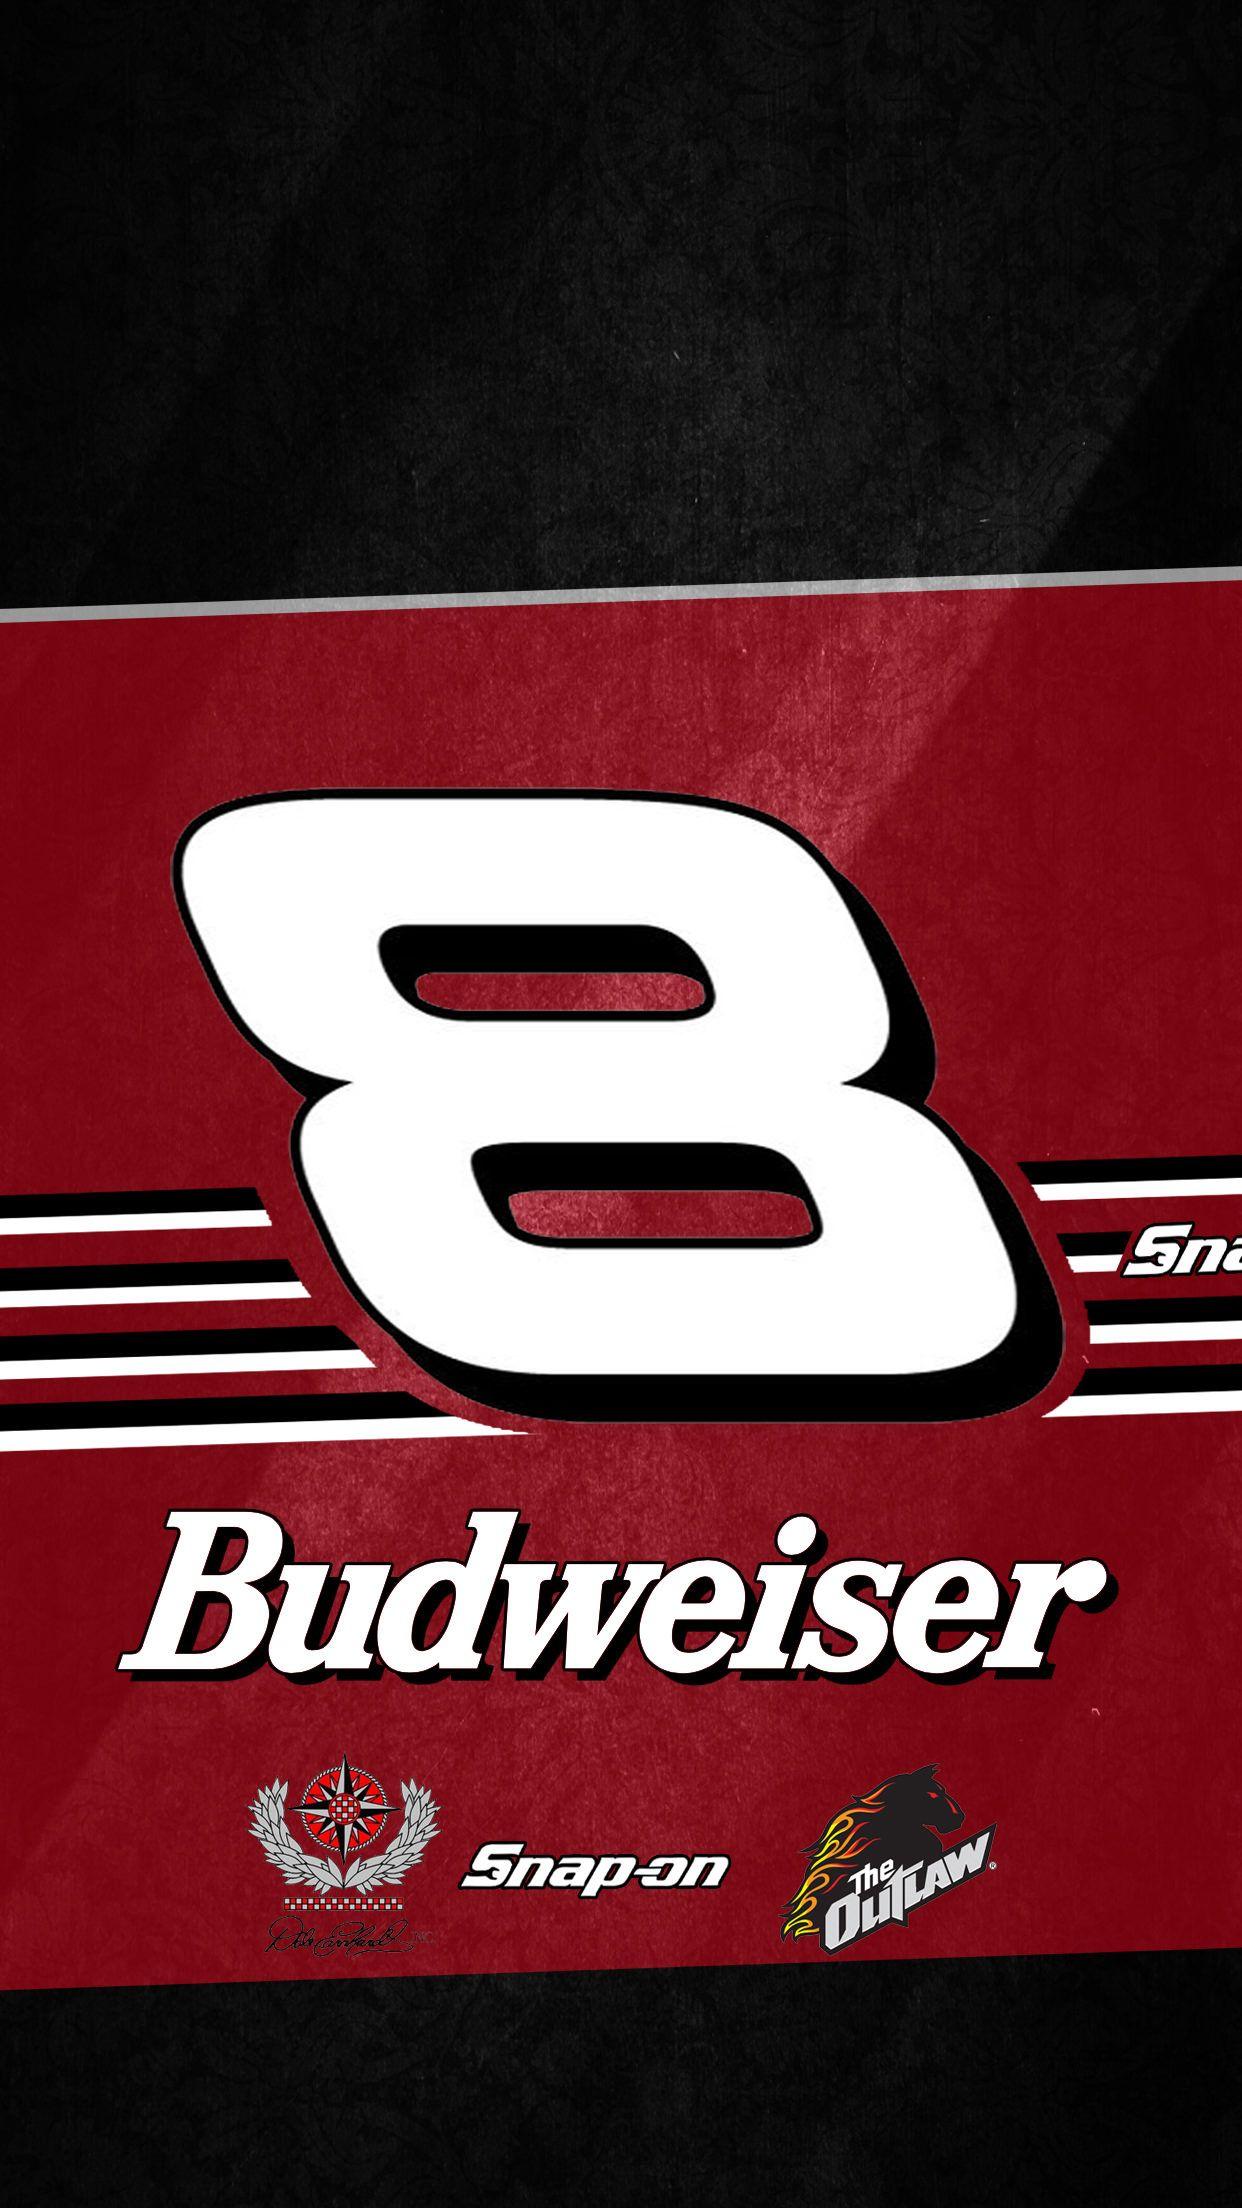 I made a Dale Jr throwback wallpaper for his final race